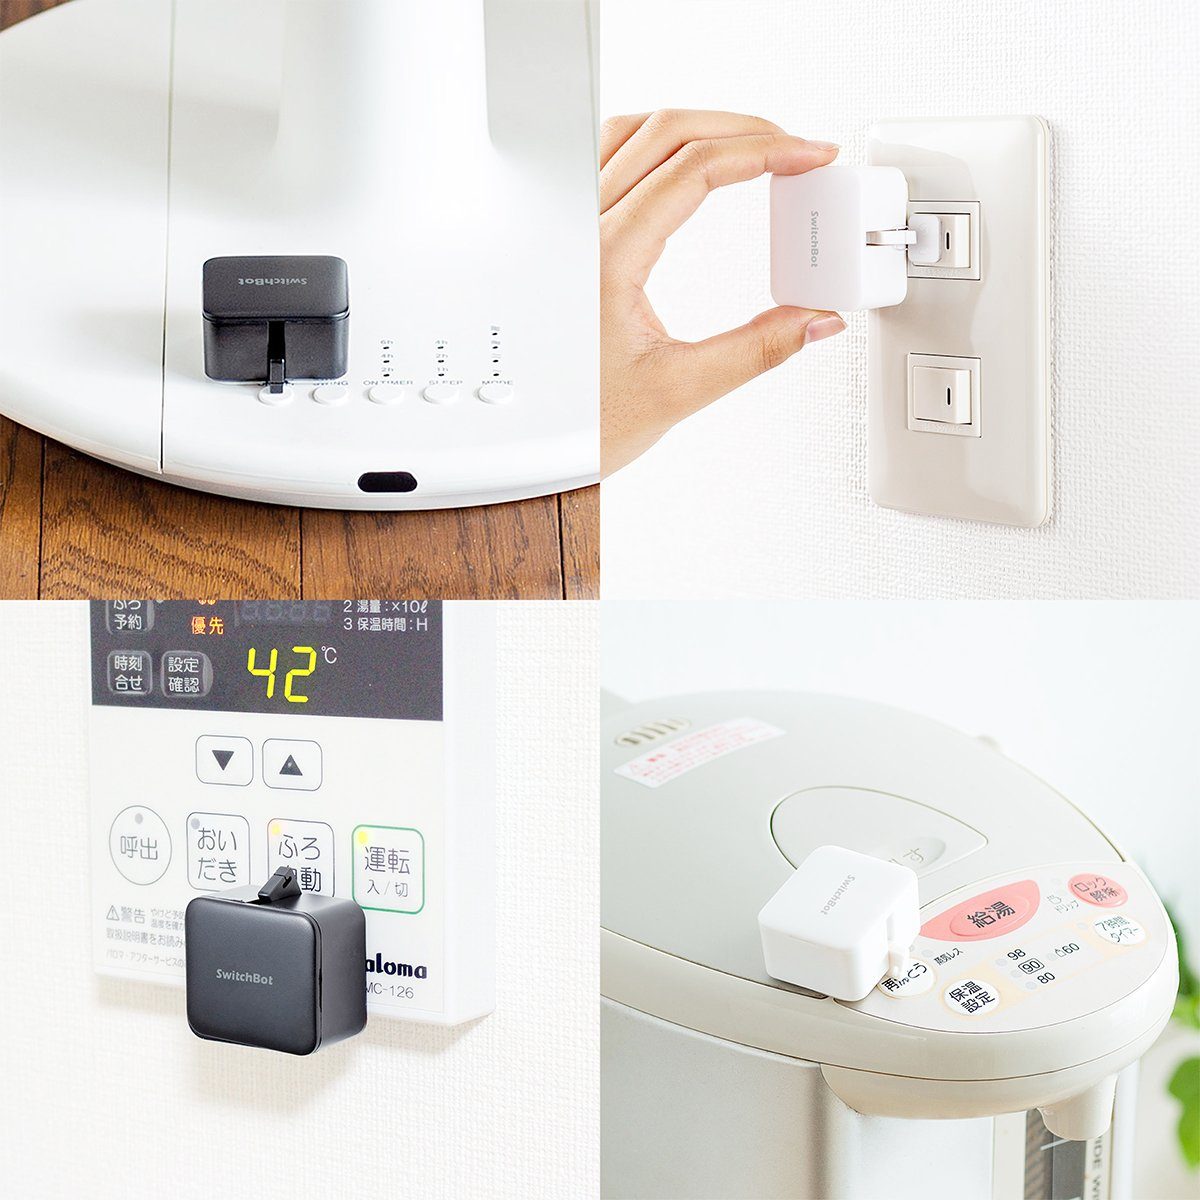 SwitchBot Bot - Iconic Button Pusher. Stick to any appliances. Smart Switch Button Pusher, Wireless App&Bluetooth connected or Timer Control. Remote button presser robot. Best selling Smart home gadget, add SwitchBot Hub compatible with Google Home, Alexa, HomePod, IFTTT